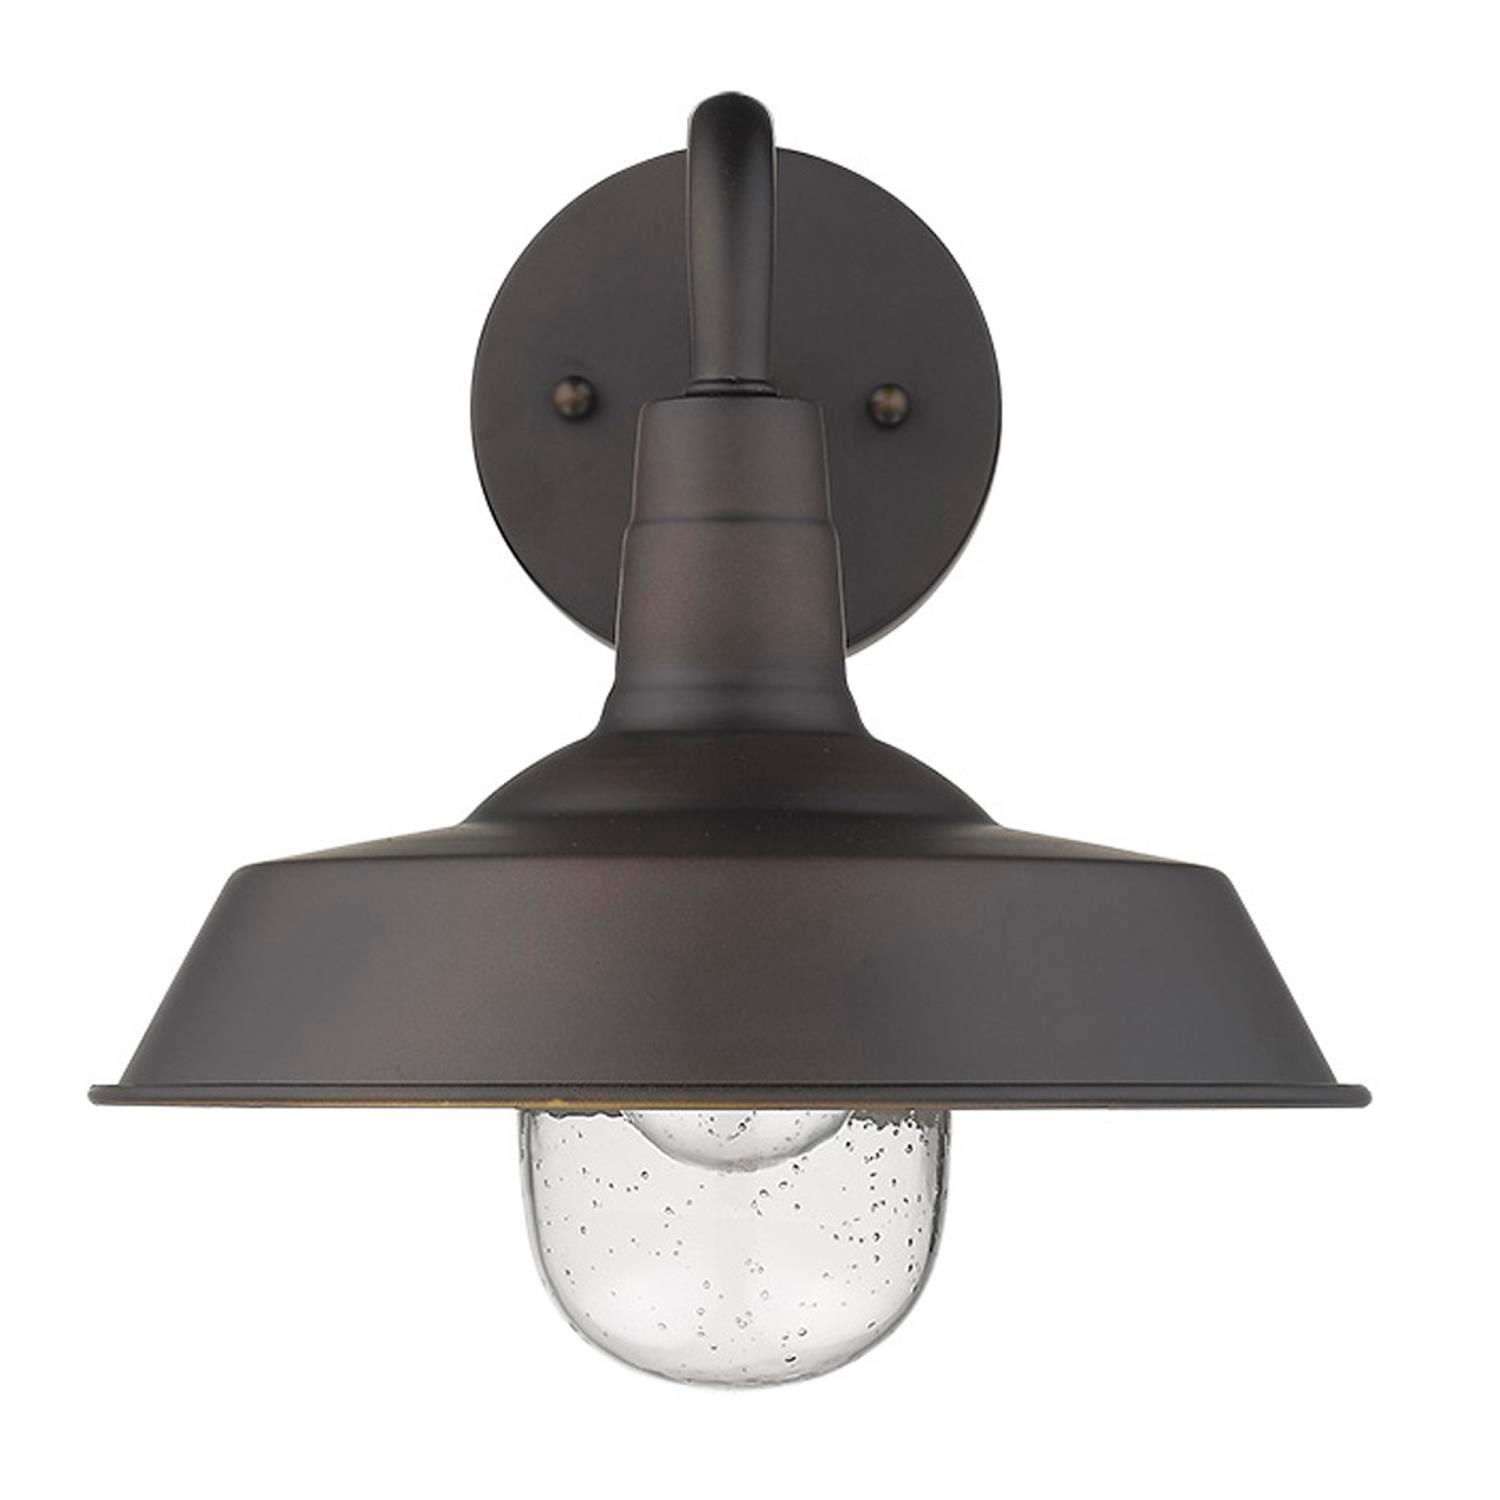 Acclaim Lighting Burry 1-Light Wall Light With Oil Rubbed Bronze Finish 1732ORB